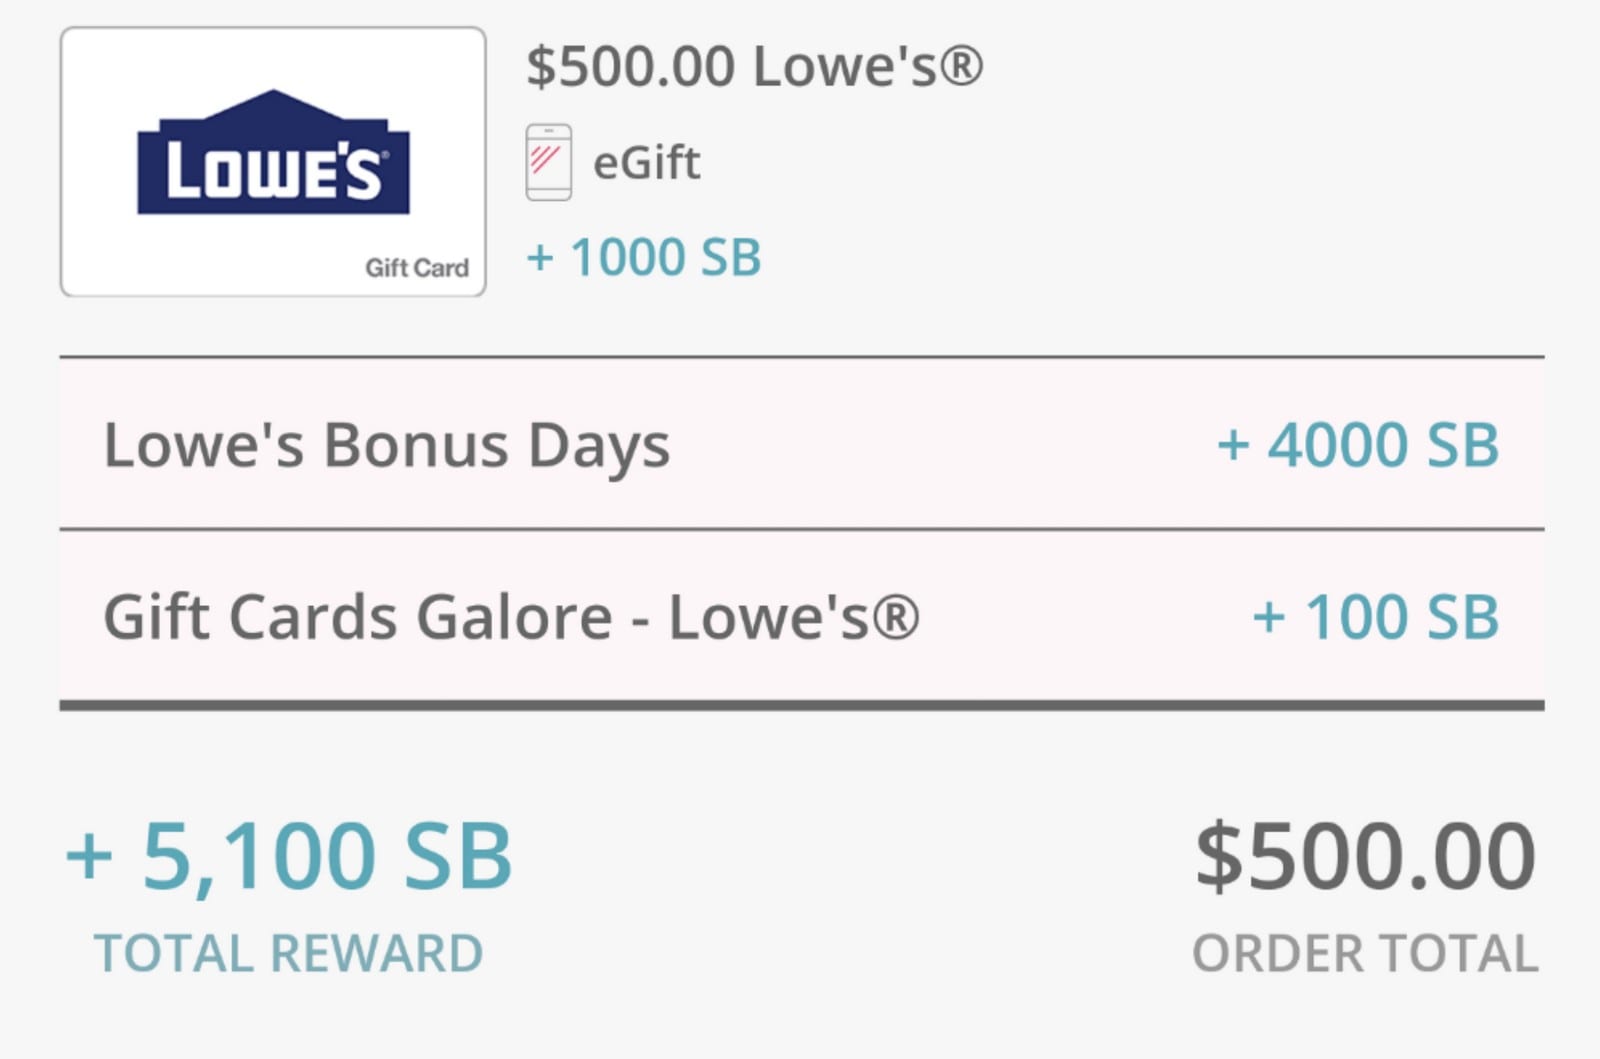 Swagbucks $10 Gift Card Promotion: Earn $10 Gift Card With $25+ Purchase